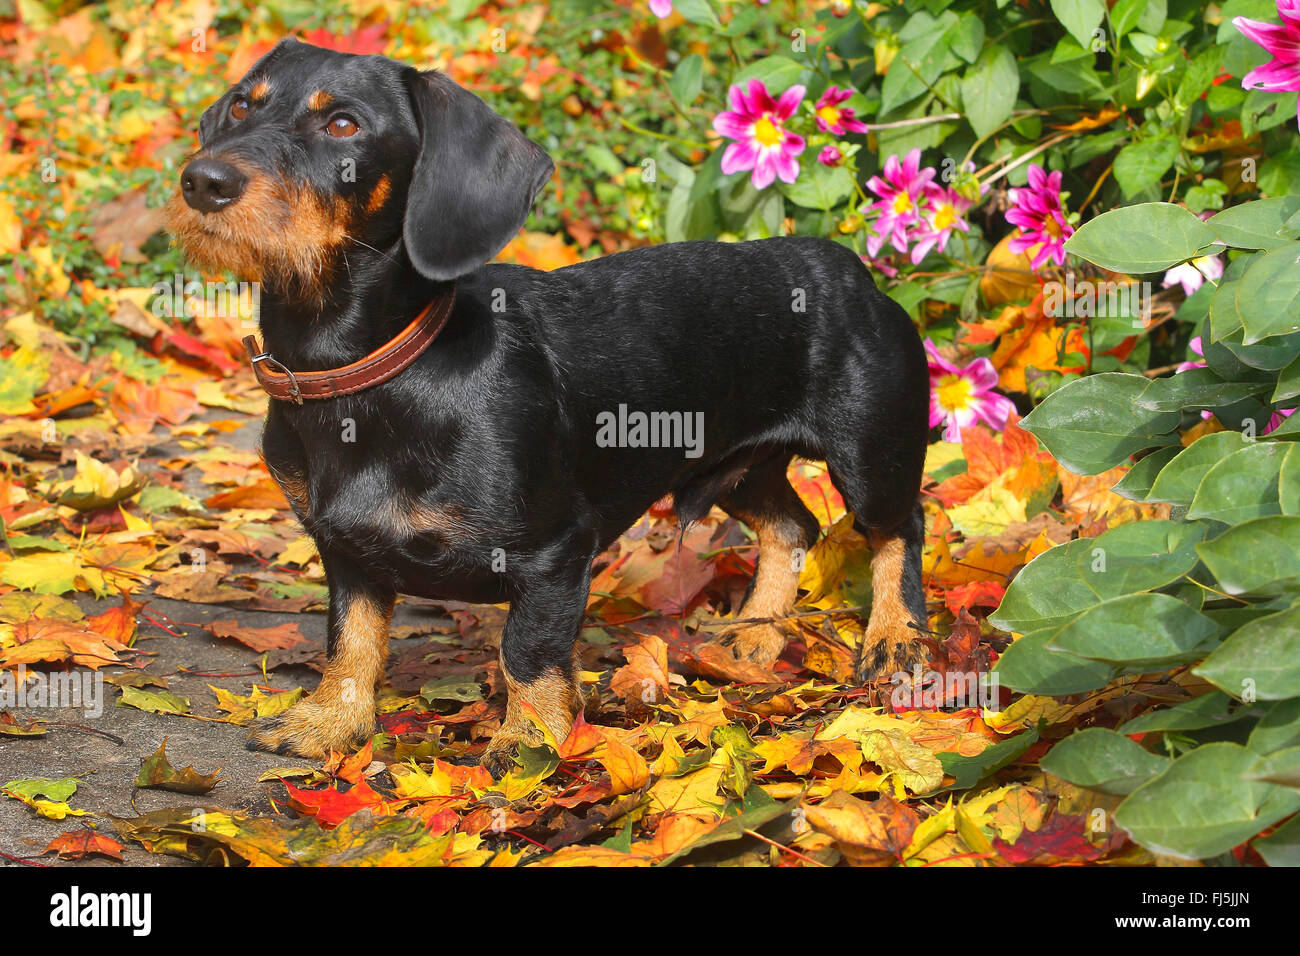 Wire-haired Dachshund, Wire-haired sausage dog, domestic dog (Canis lupus f. familiaris), black and tan nineteen months old male dog standing in autumn foliage in front of dahlias, Germany Stock Photo